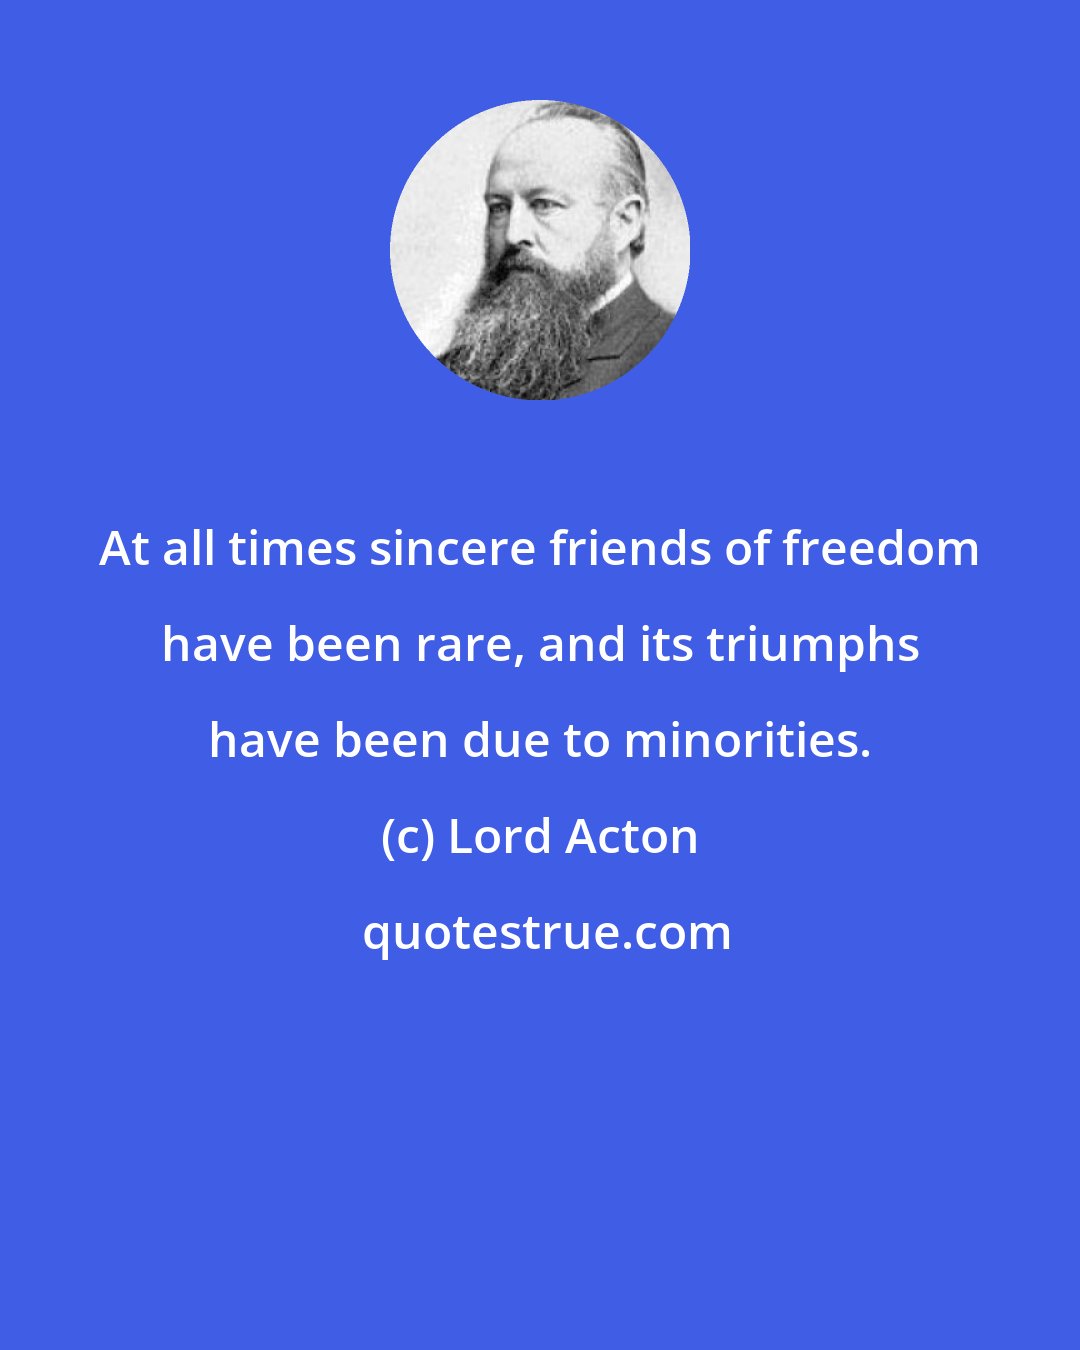 Lord Acton: At all times sincere friends of freedom have been rare, and its triumphs have been due to minorities.